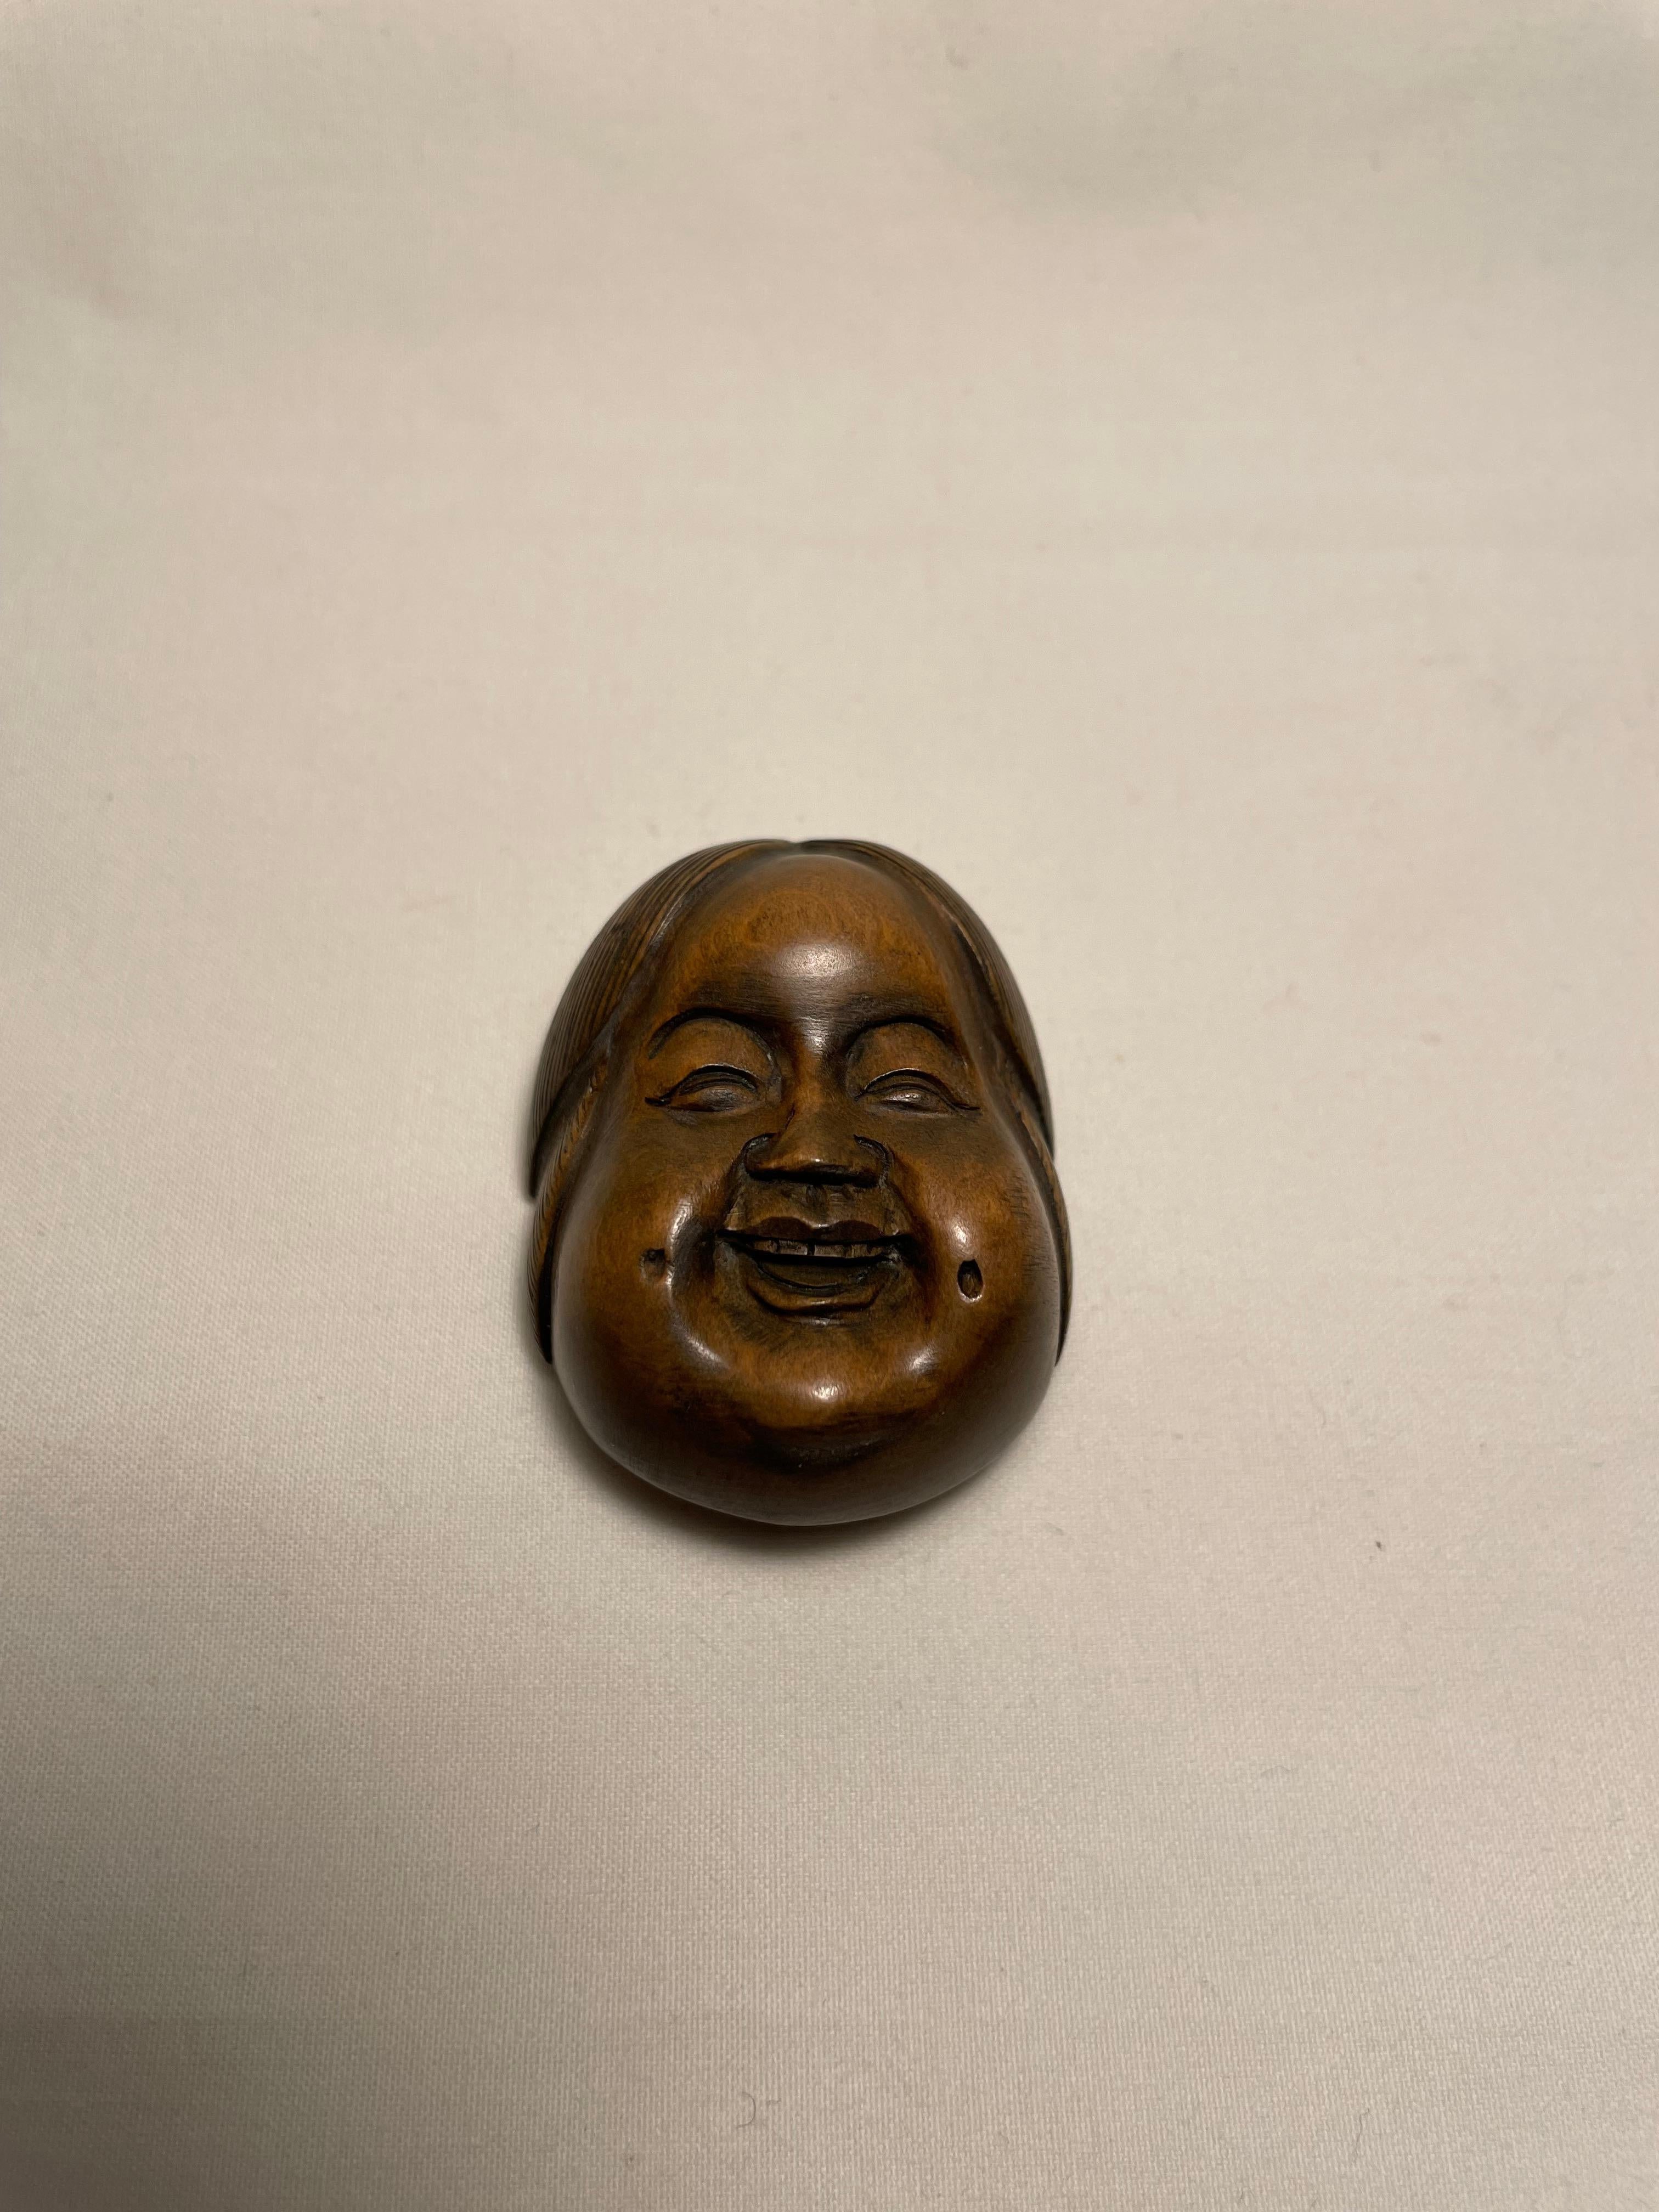 This is an antique netsuke made in Japan around Showa period 1950s.

Netsuke is a miniature sculpture, originating in 17th century Japan.
Initially a simply-carved button fastener on the cords of an inro box, netsuke later developed into ornately